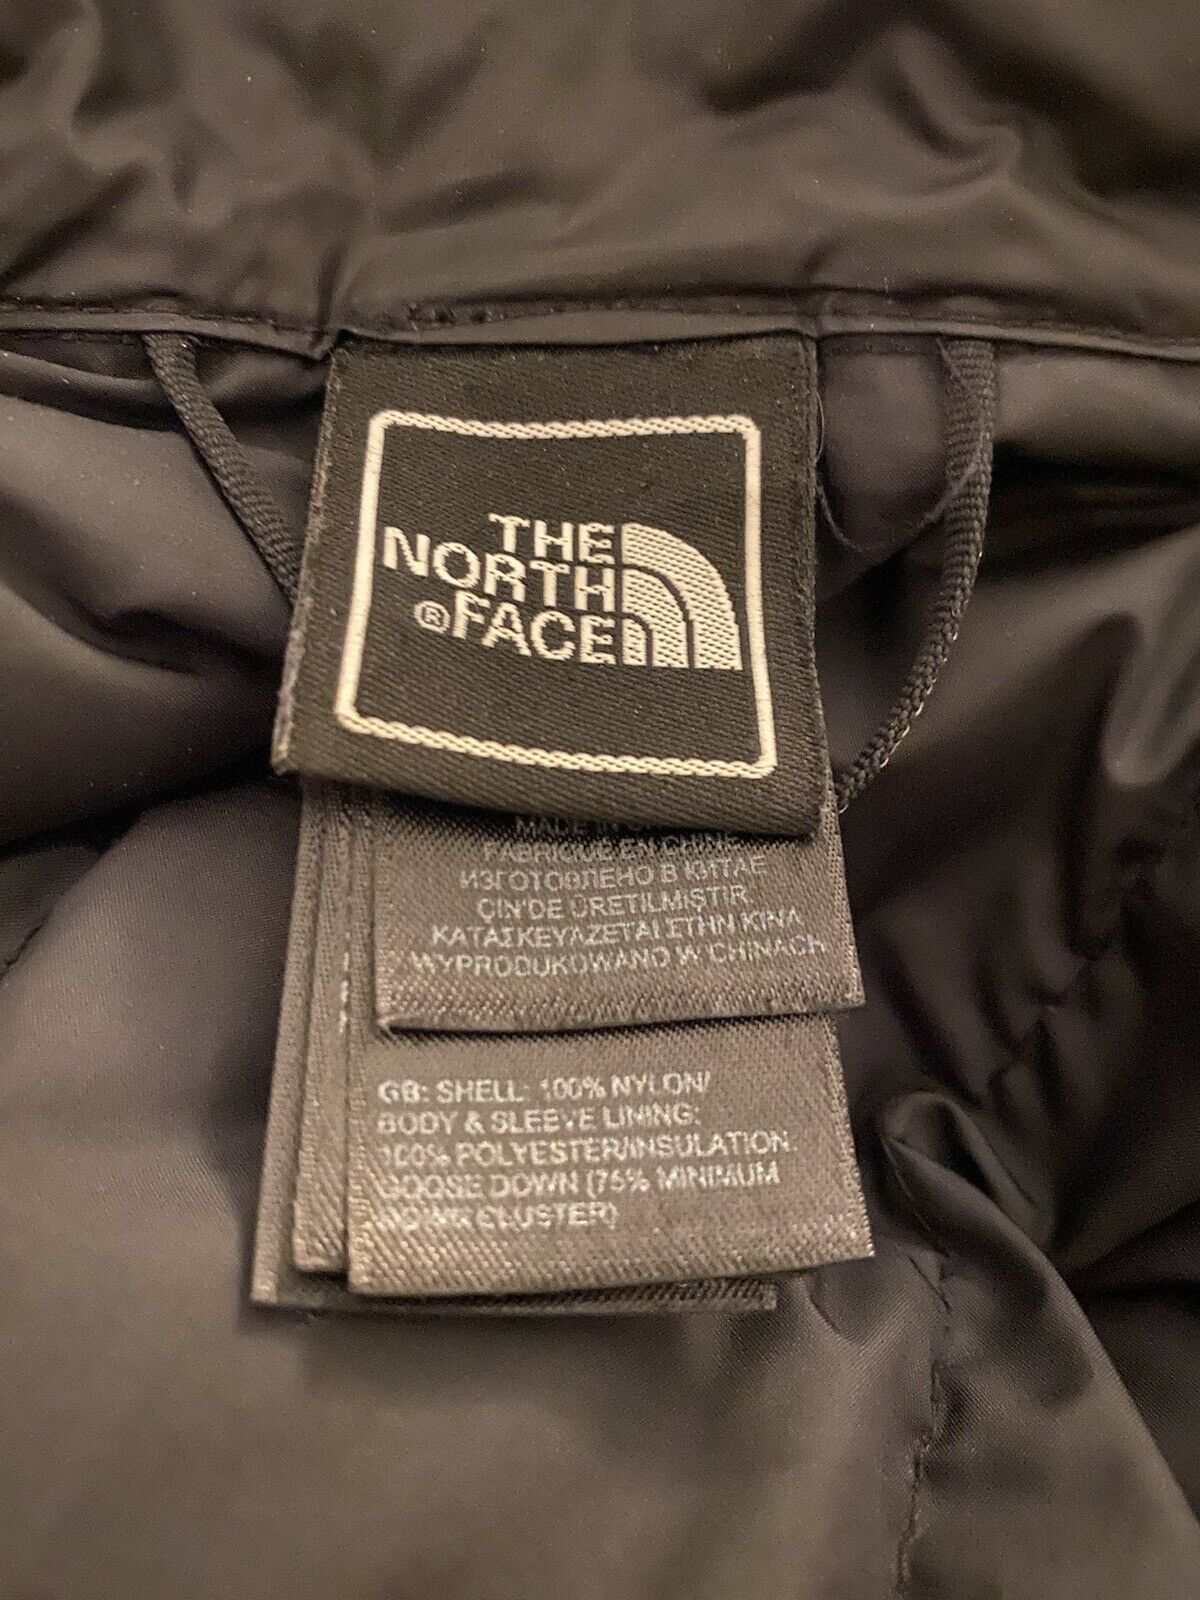 North Face Womens Down Long Coat -Size 8 | eBay